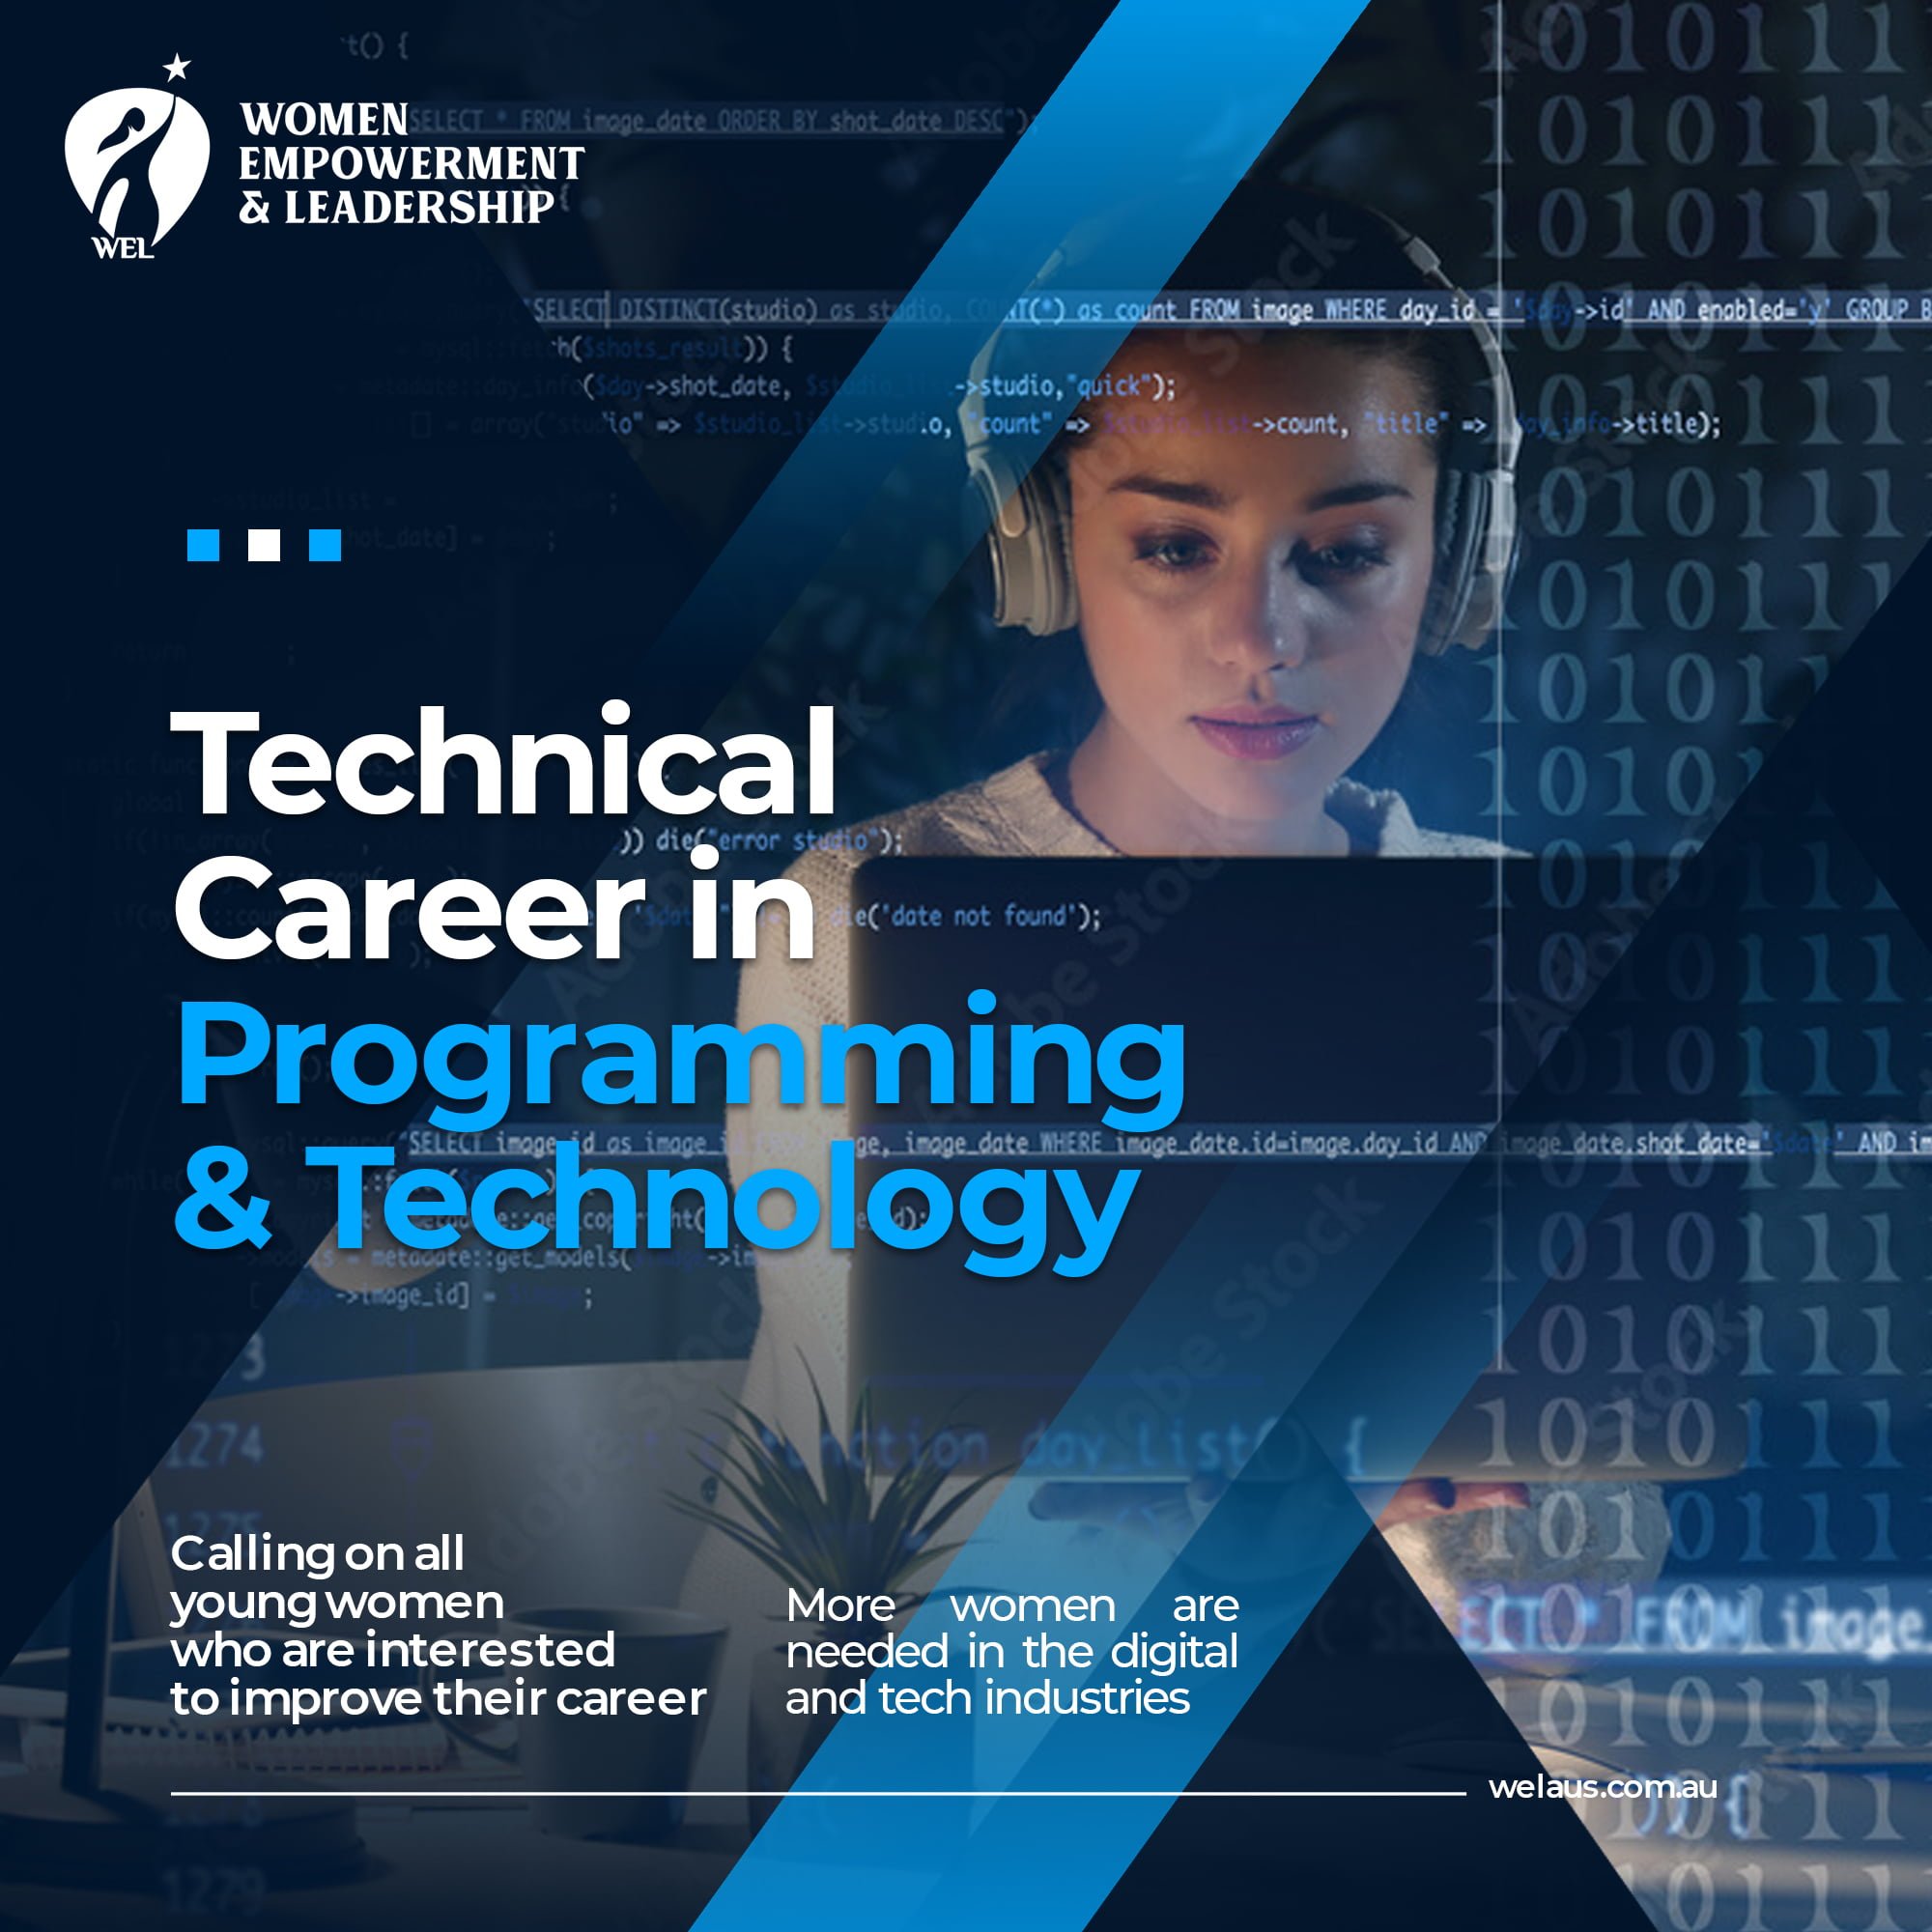 CALLING ON YOUNG WOMEN AND GIRLS WHO ARE INTERESTED IN A TECHNICAL CAREER IN PROGRAMMING AND TECHNOLOGY